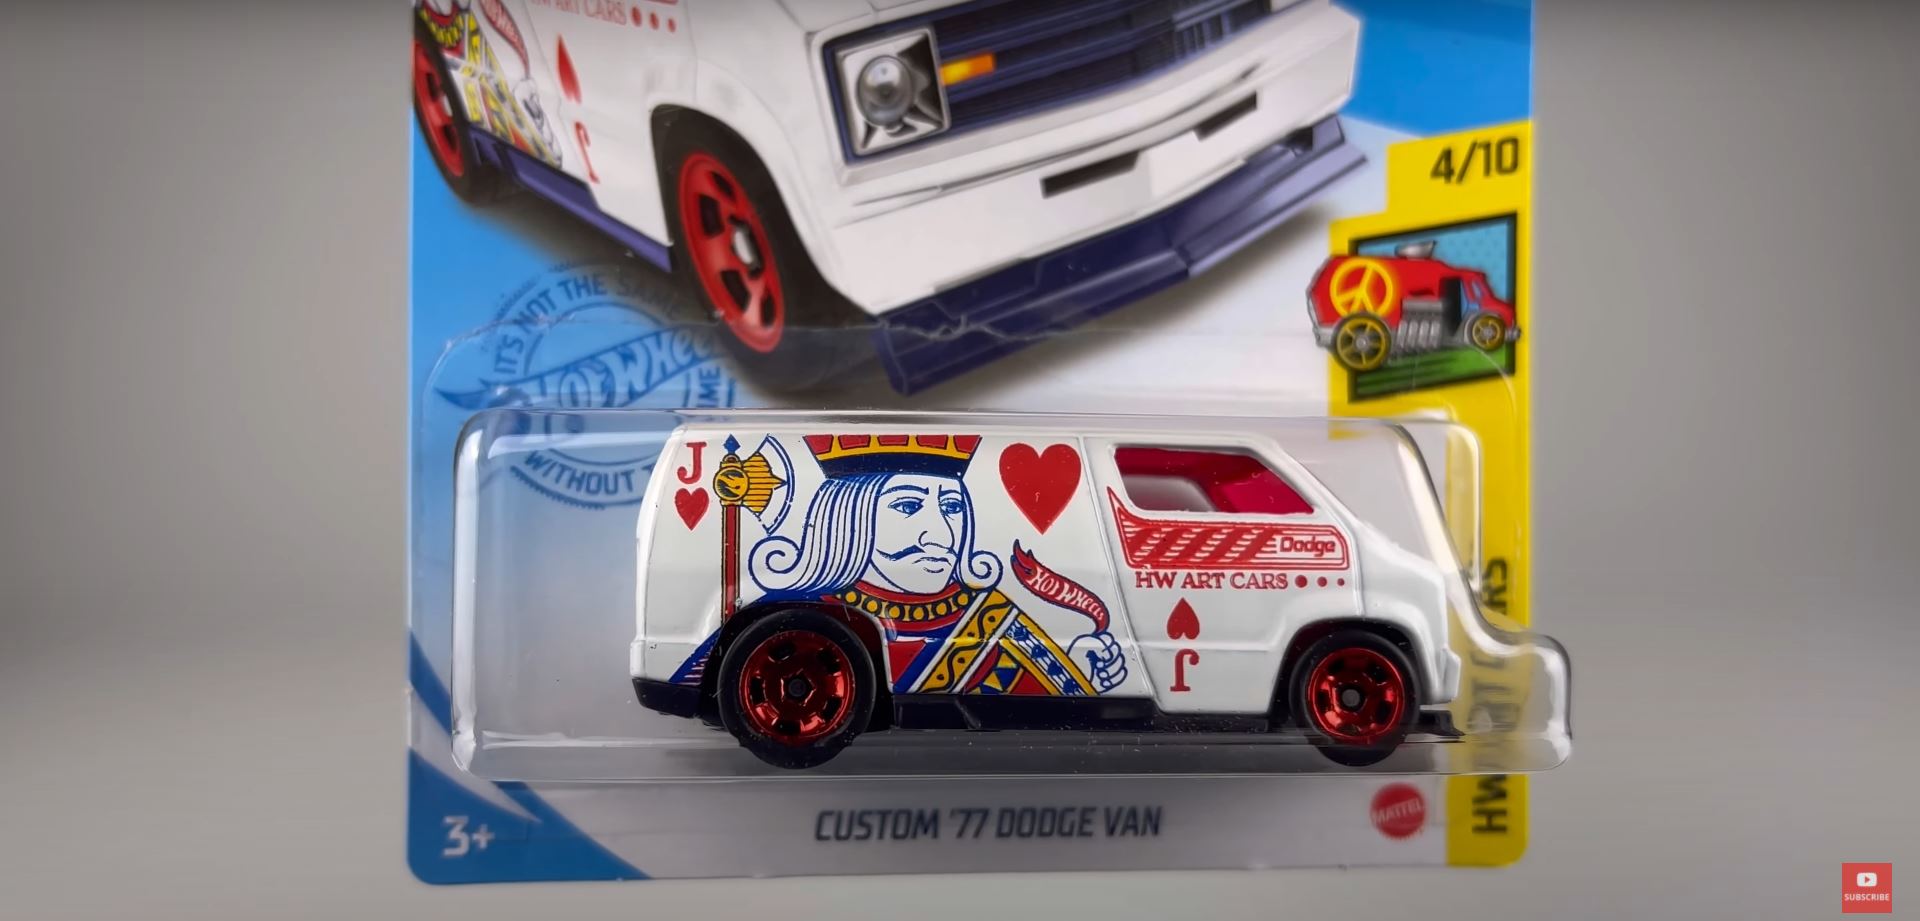 2021 Hot Wheels Treasure Hunt Cars Get Released, You Should Keep an Eye Out  for Them - autoevolution